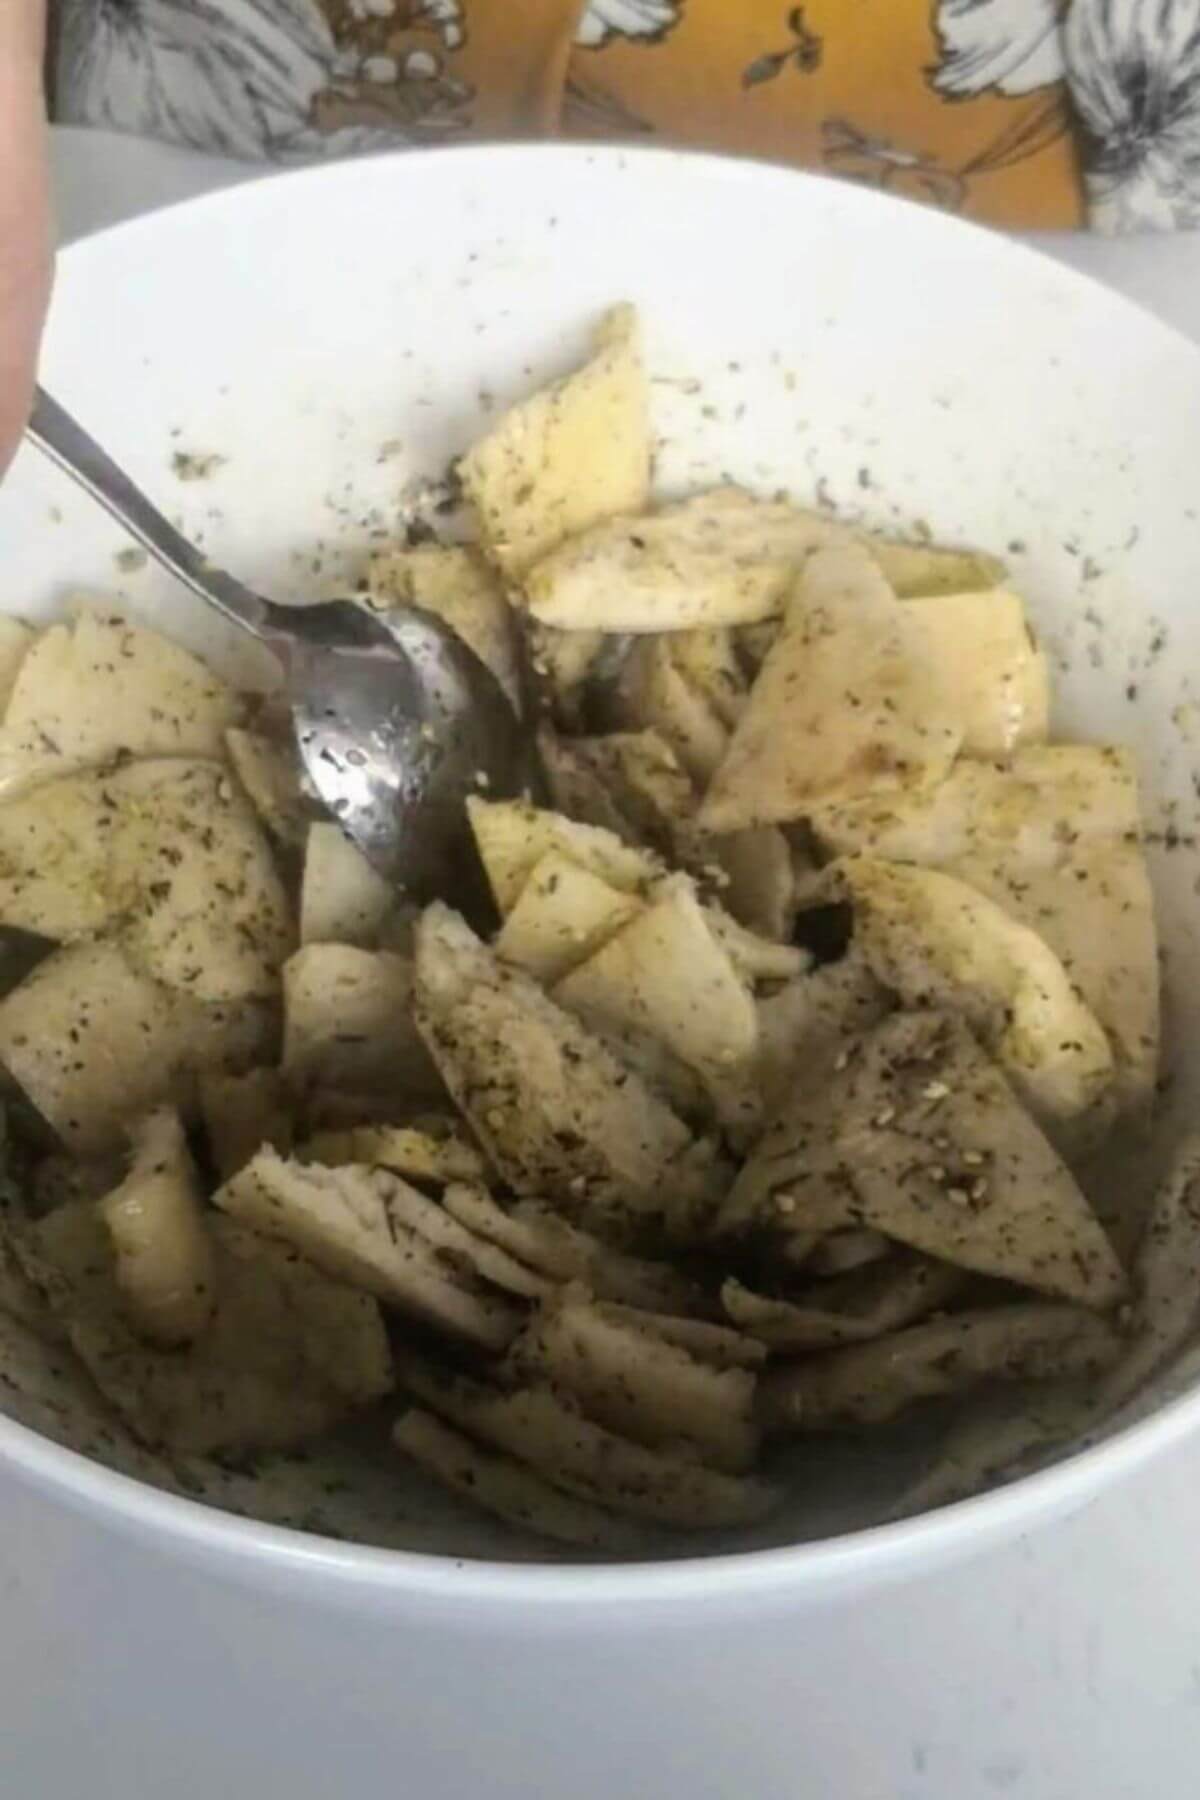 Pita triangles mixed with za'atar oil in a large white bowl.